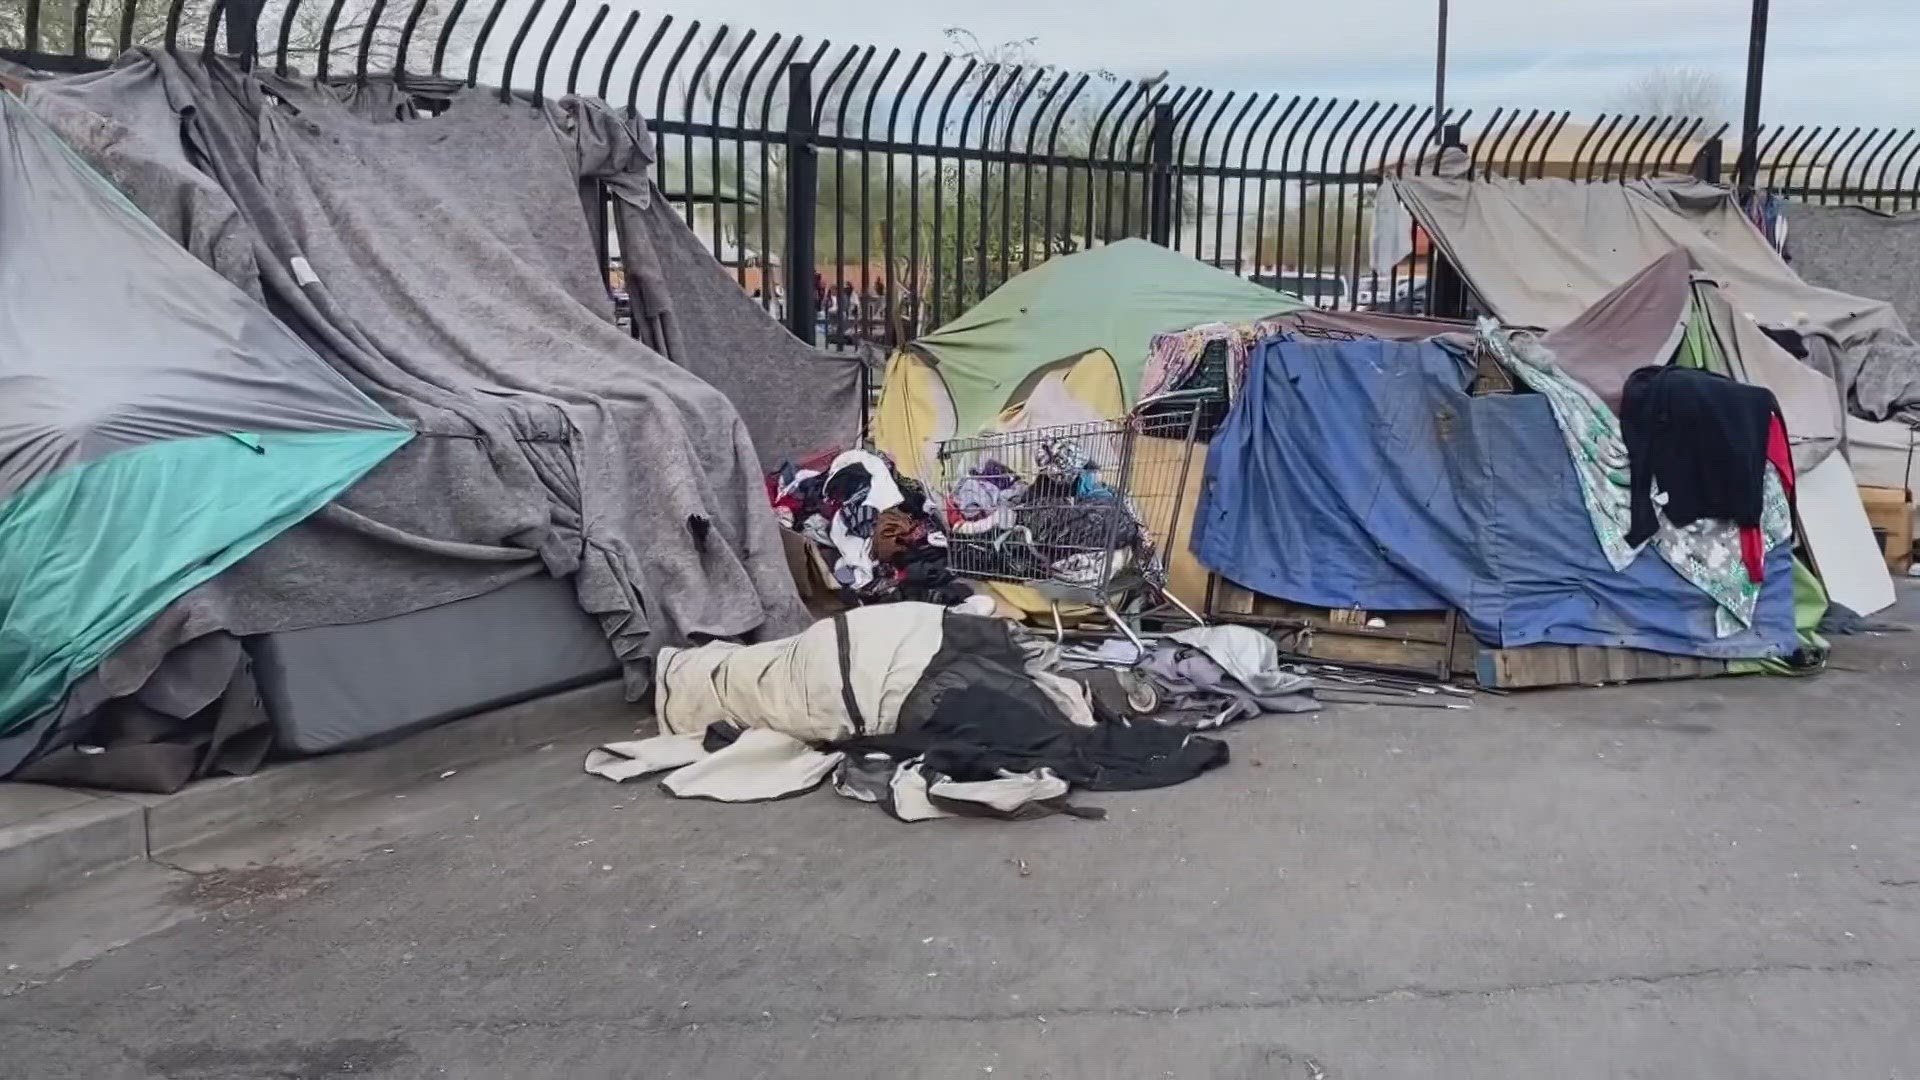 Phoenix's largest homeless encampment is just minutes away from the Arizona Capitol, home to many legislator's offices.